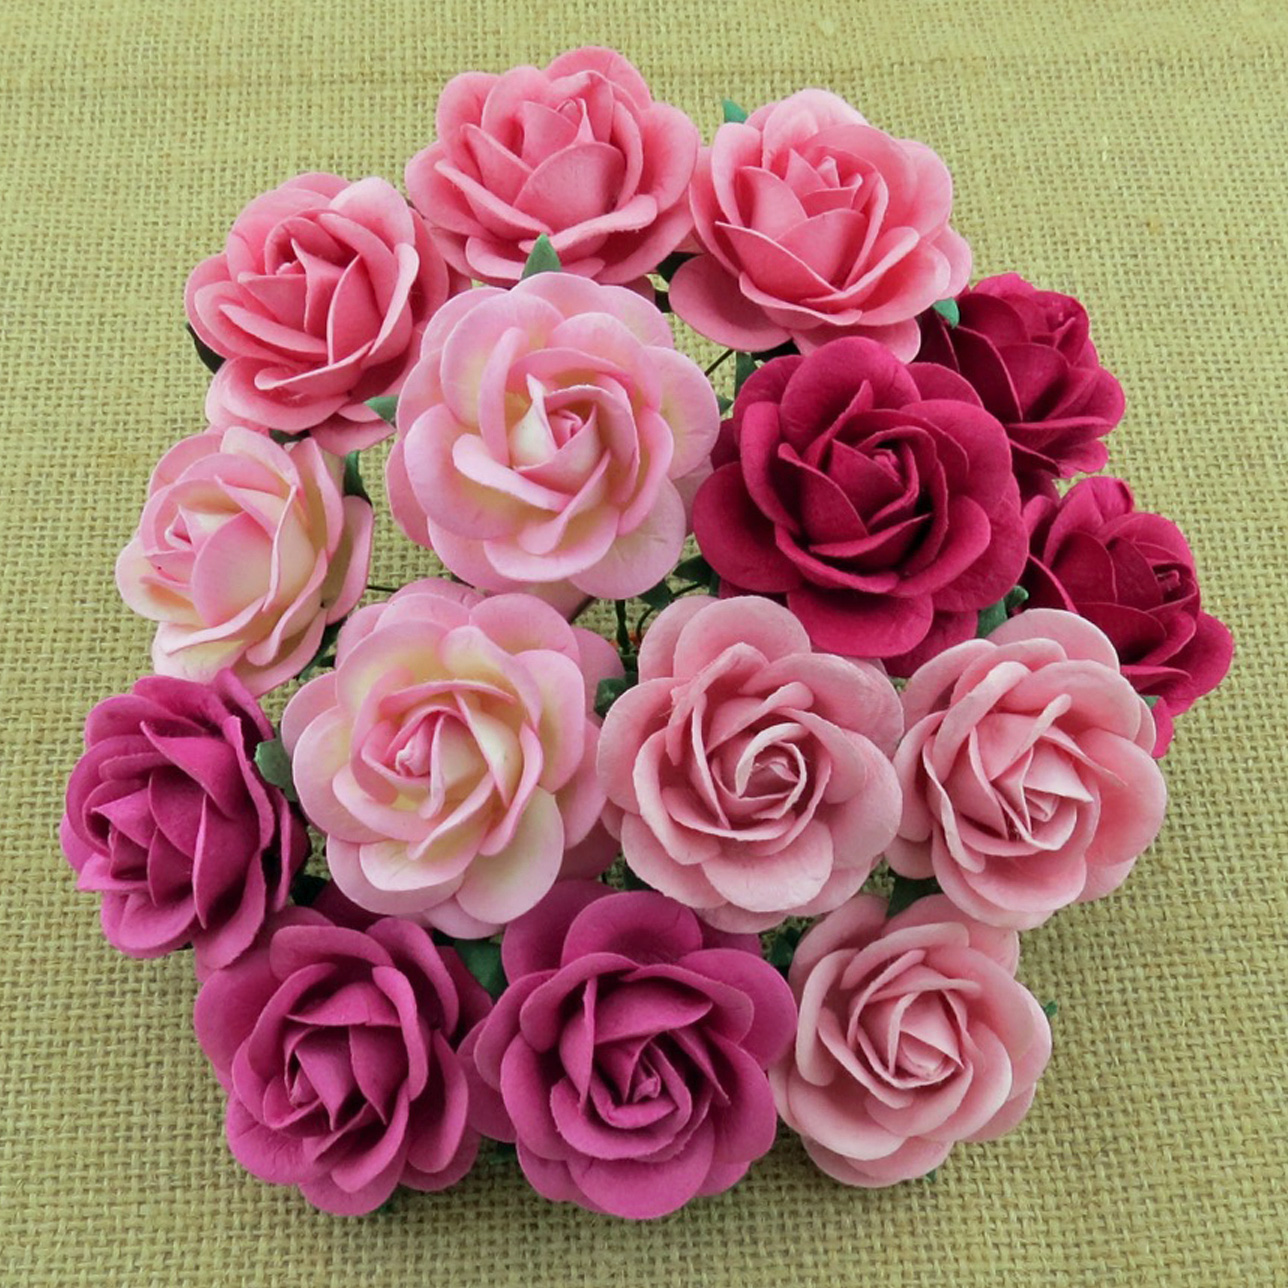 50 MIXED PINK MULBERRY PAPER TRELLIS ROSES - 5 COLOR